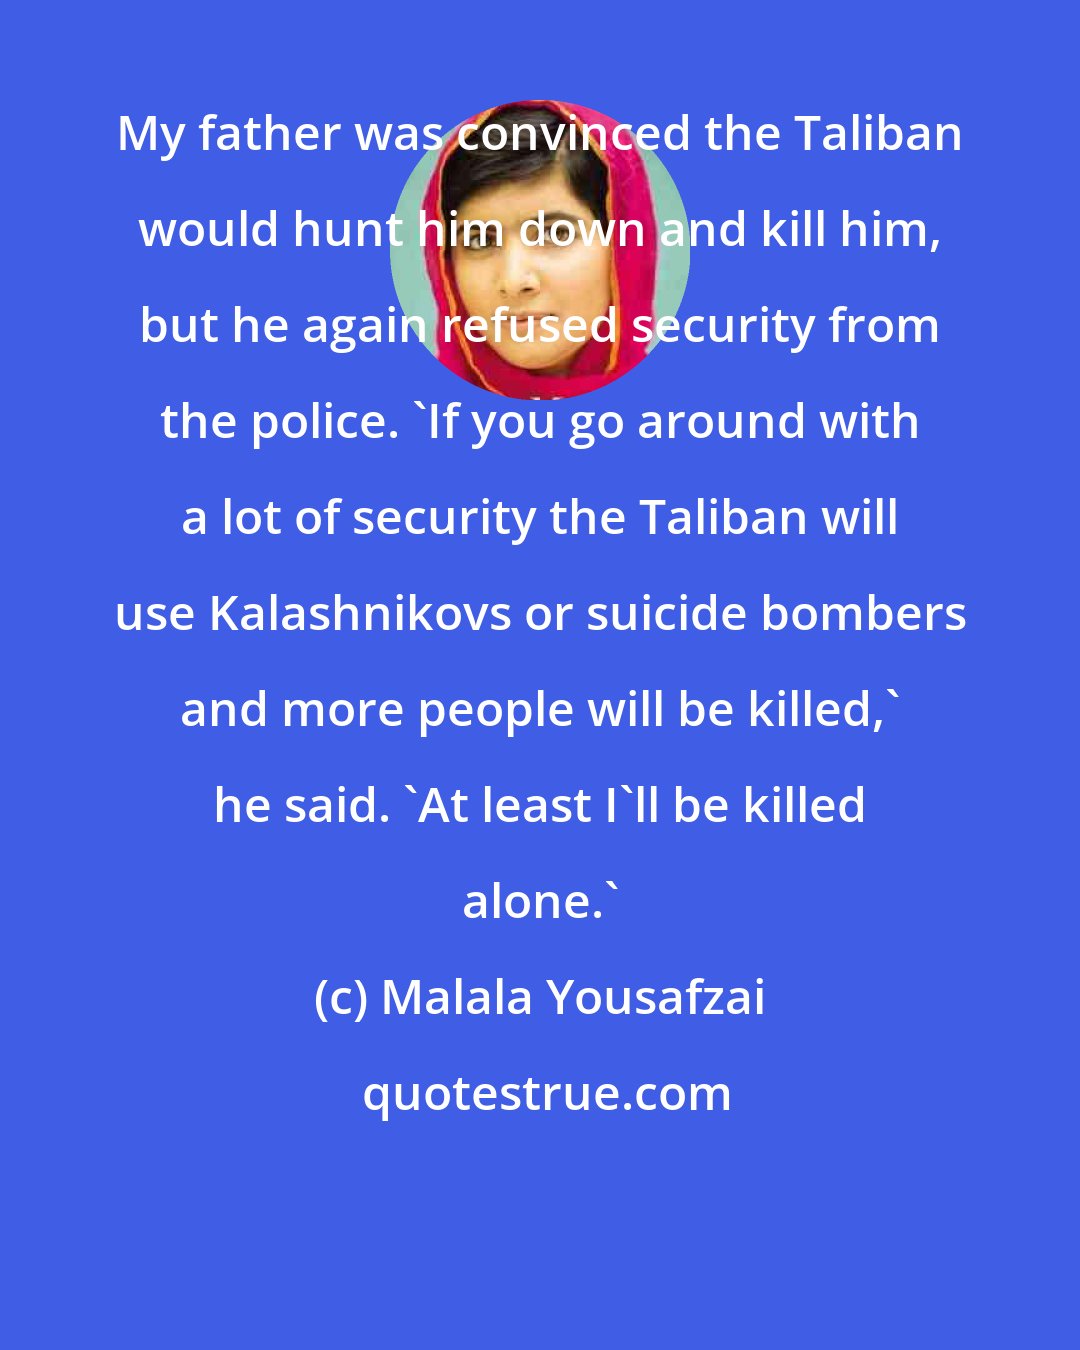 Malala Yousafzai: My father was convinced the Taliban would hunt him down and kill him, but he again refused security from the police. 'If you go around with a lot of security the Taliban will use Kalashnikovs or suicide bombers and more people will be killed,' he said. 'At least I'll be killed alone.'